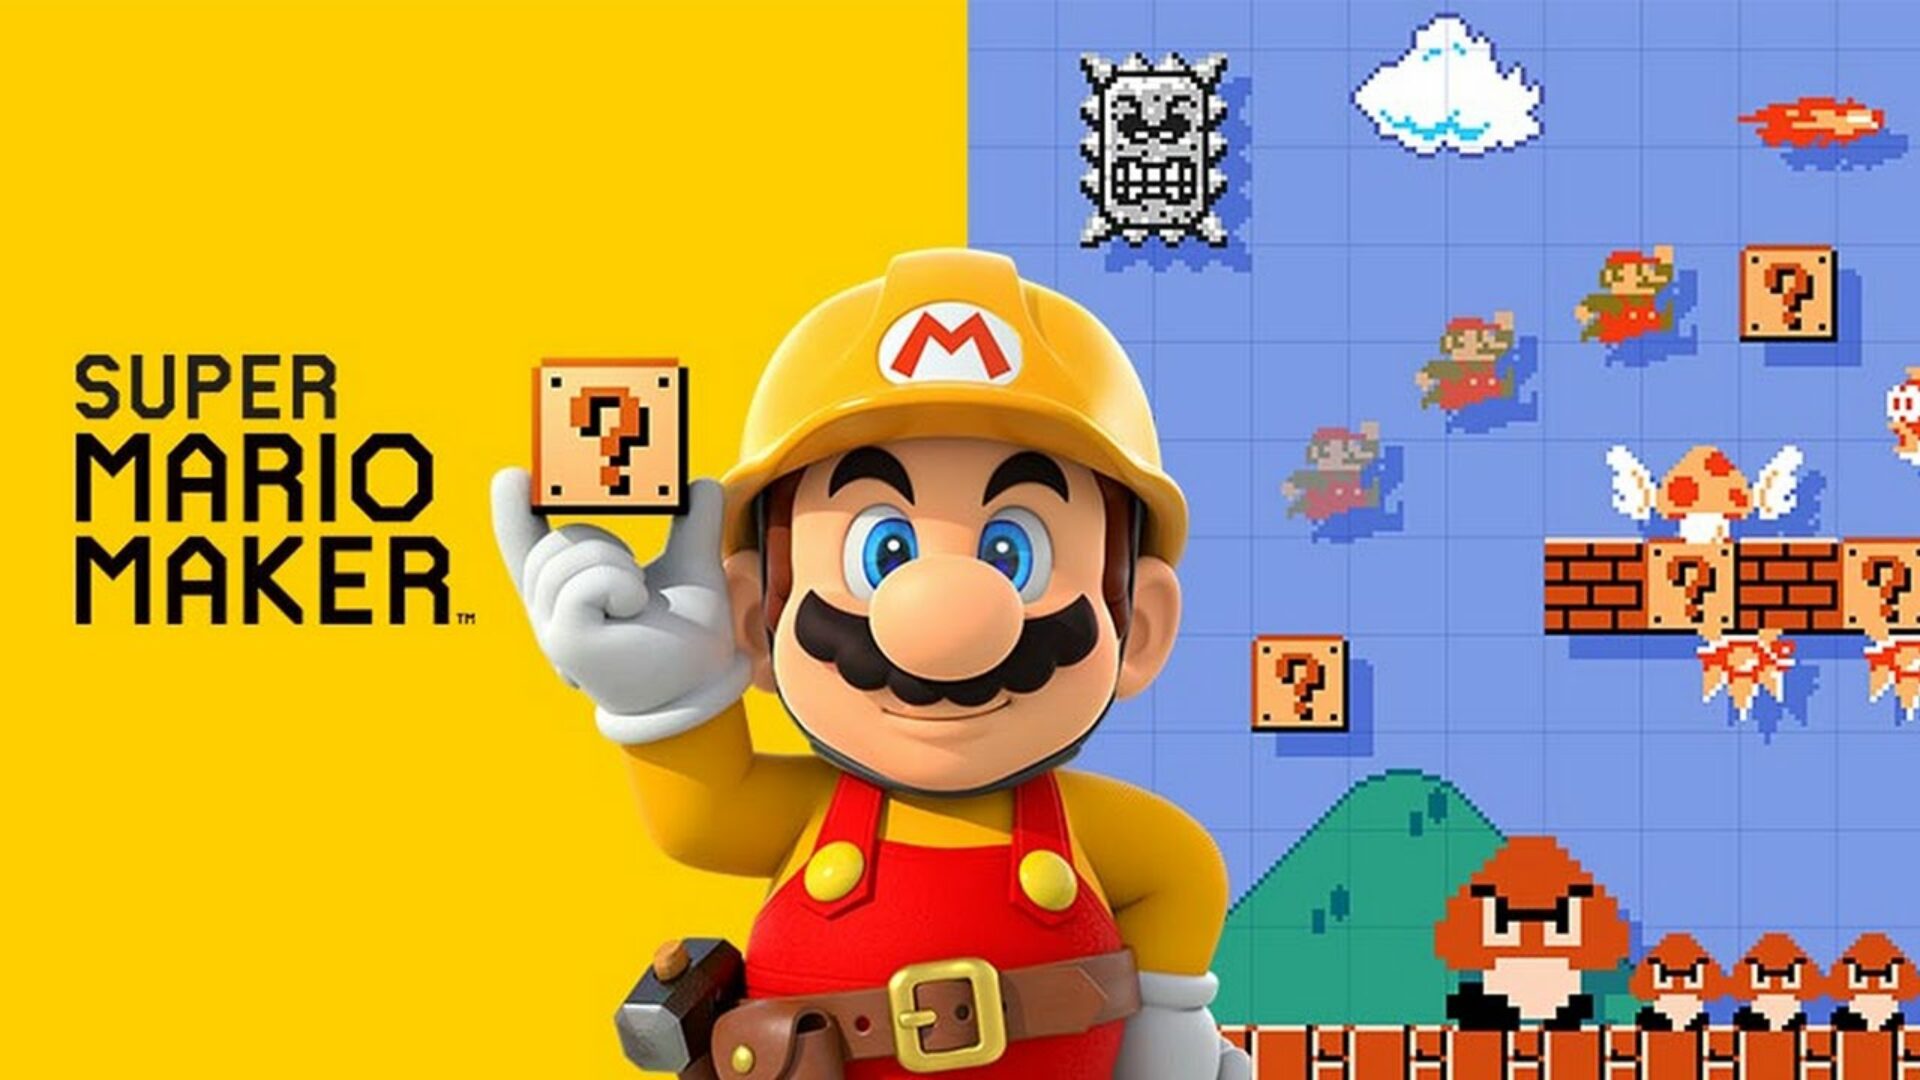 Free Update Arriving to Super Mario Maker Today